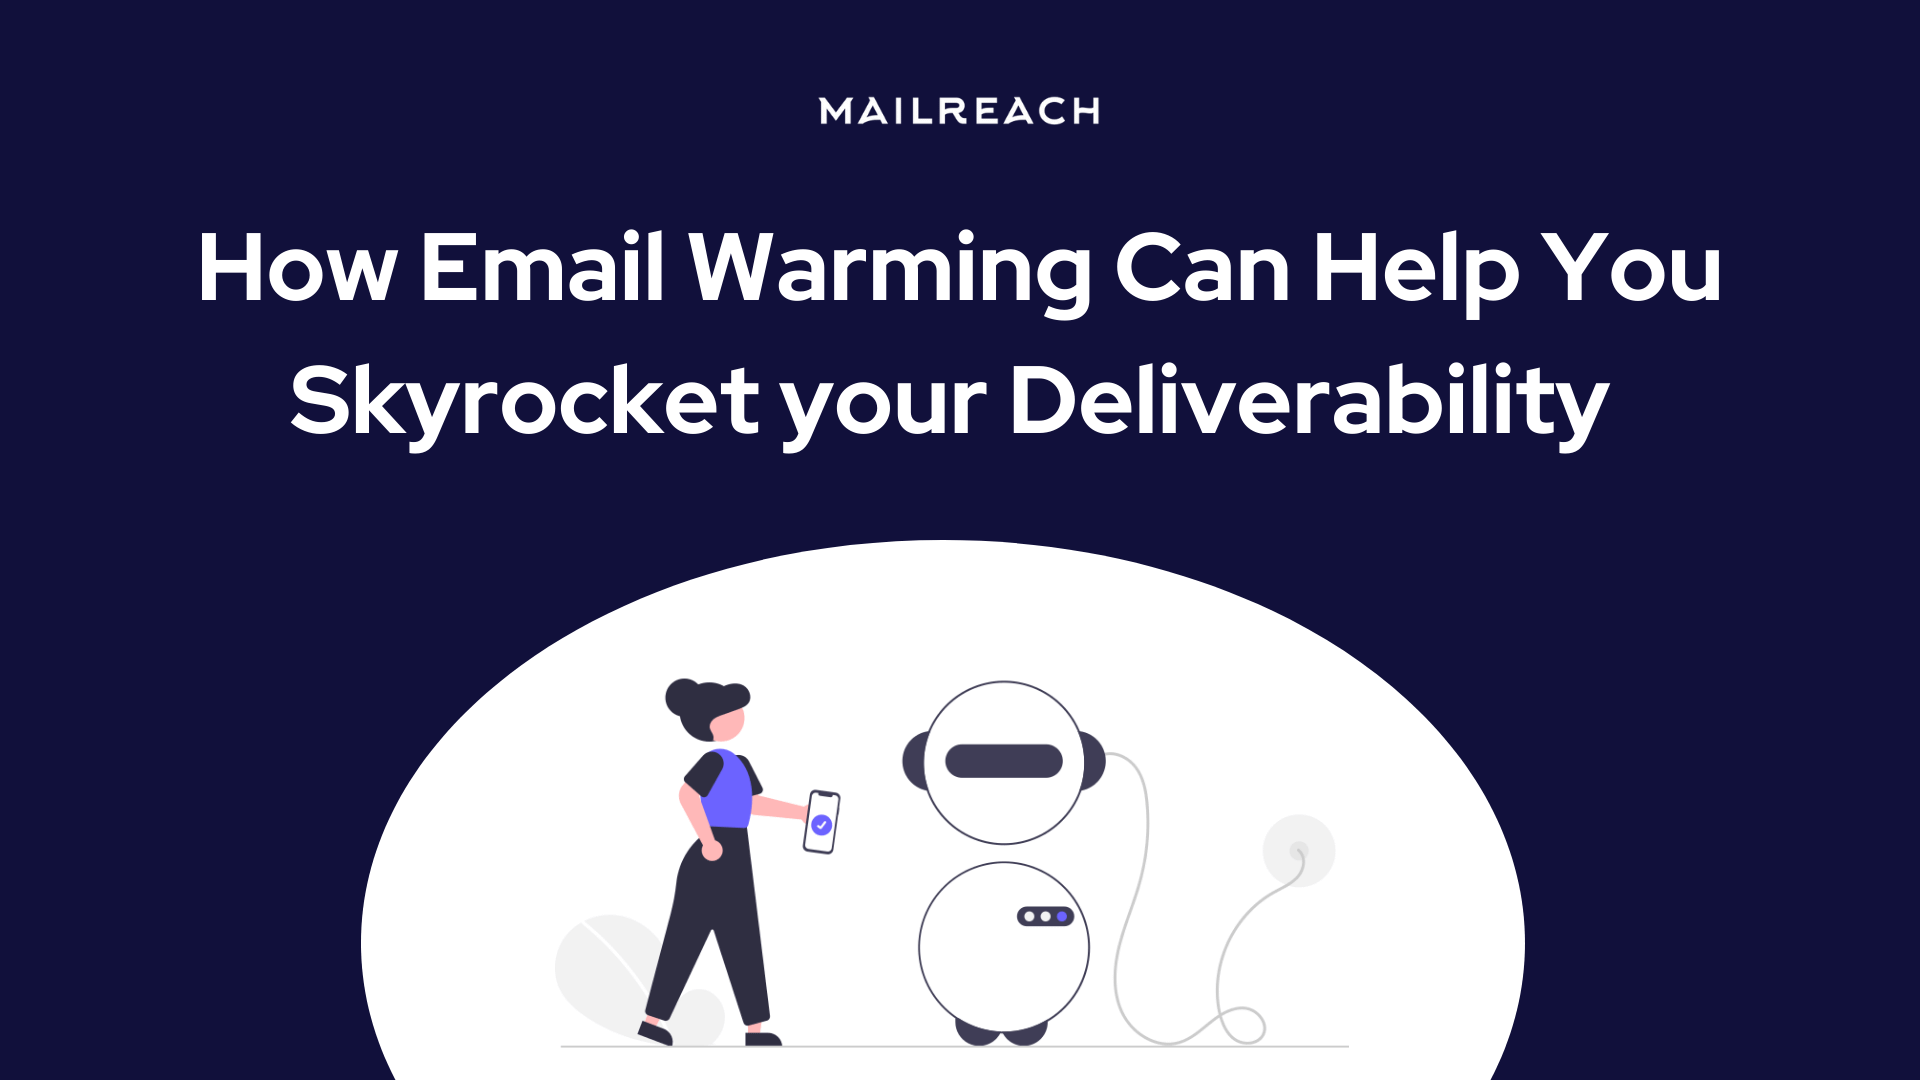 An Email Warming Service Can Help You Skyrocket your Deliverability